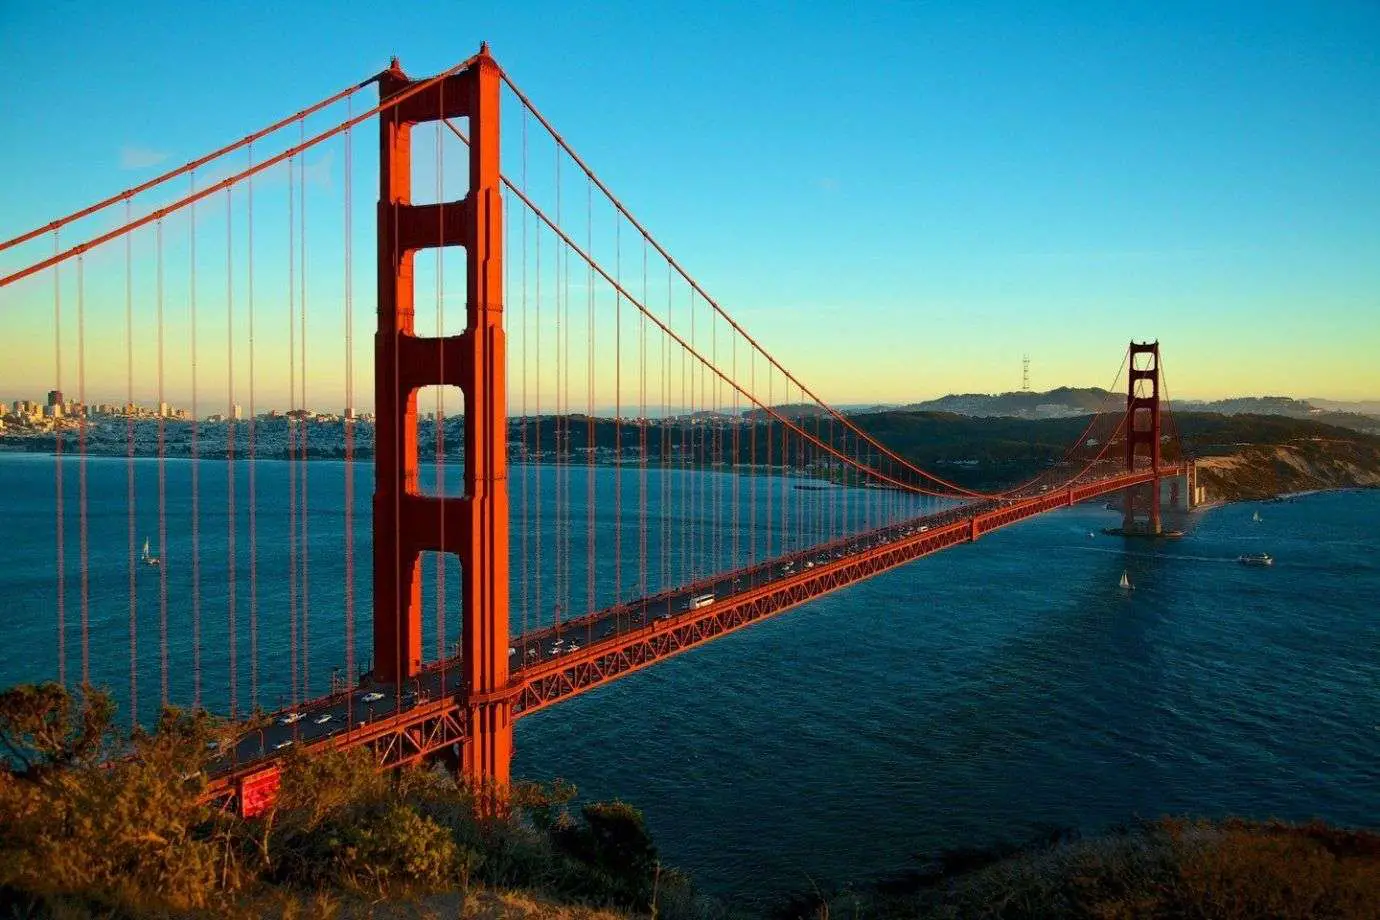 What to Do in San Francisco